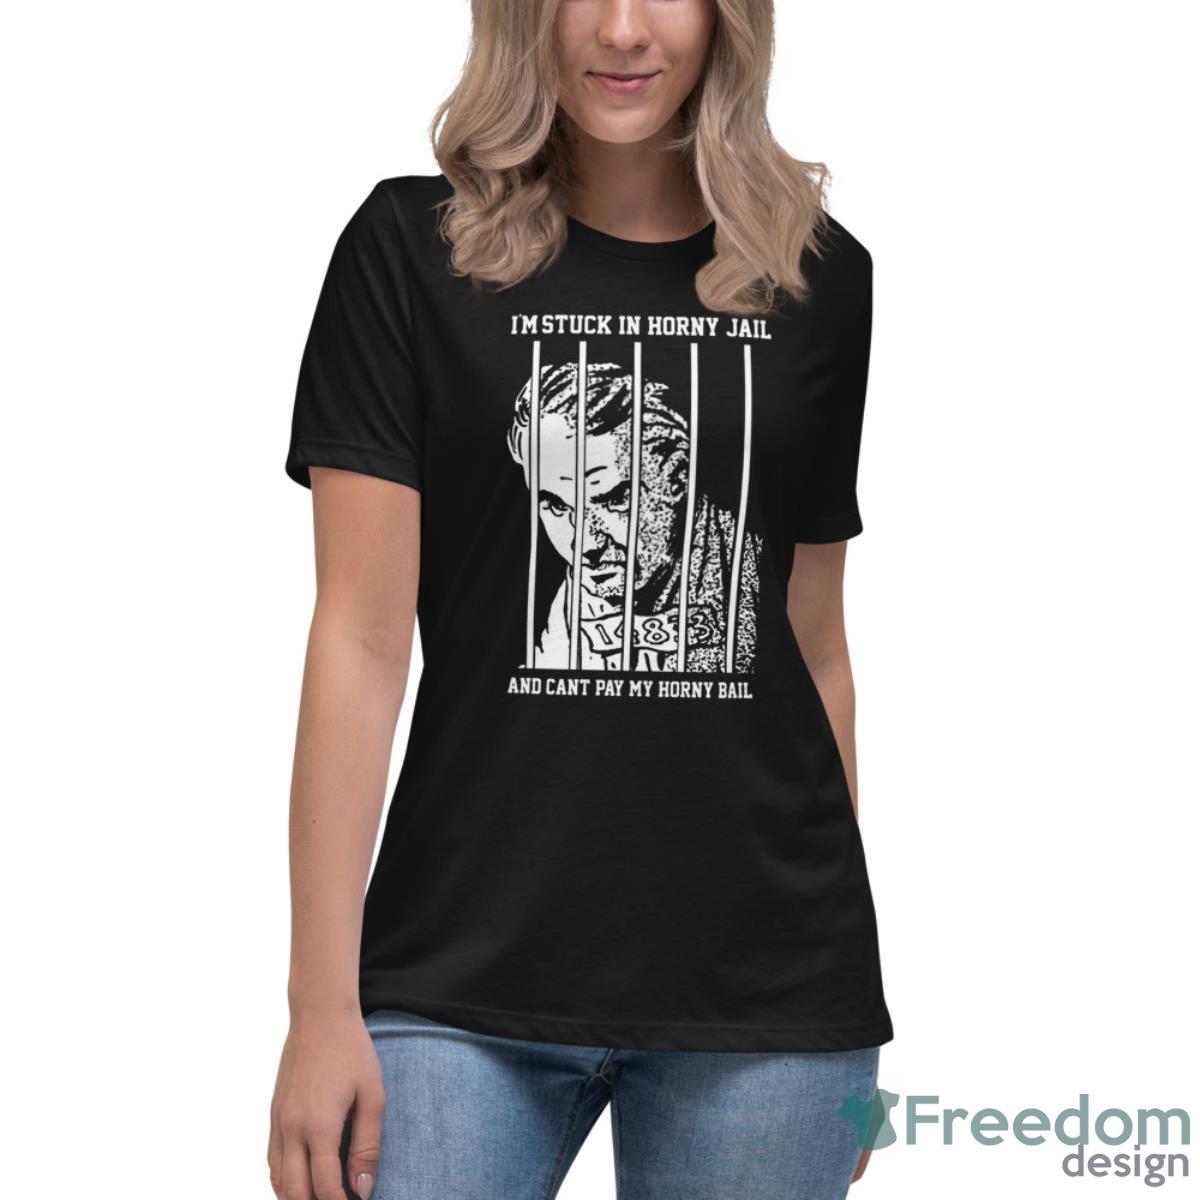 I’m Stuck In Horny Jail And Can’t Pay My Horny Bail Shirt